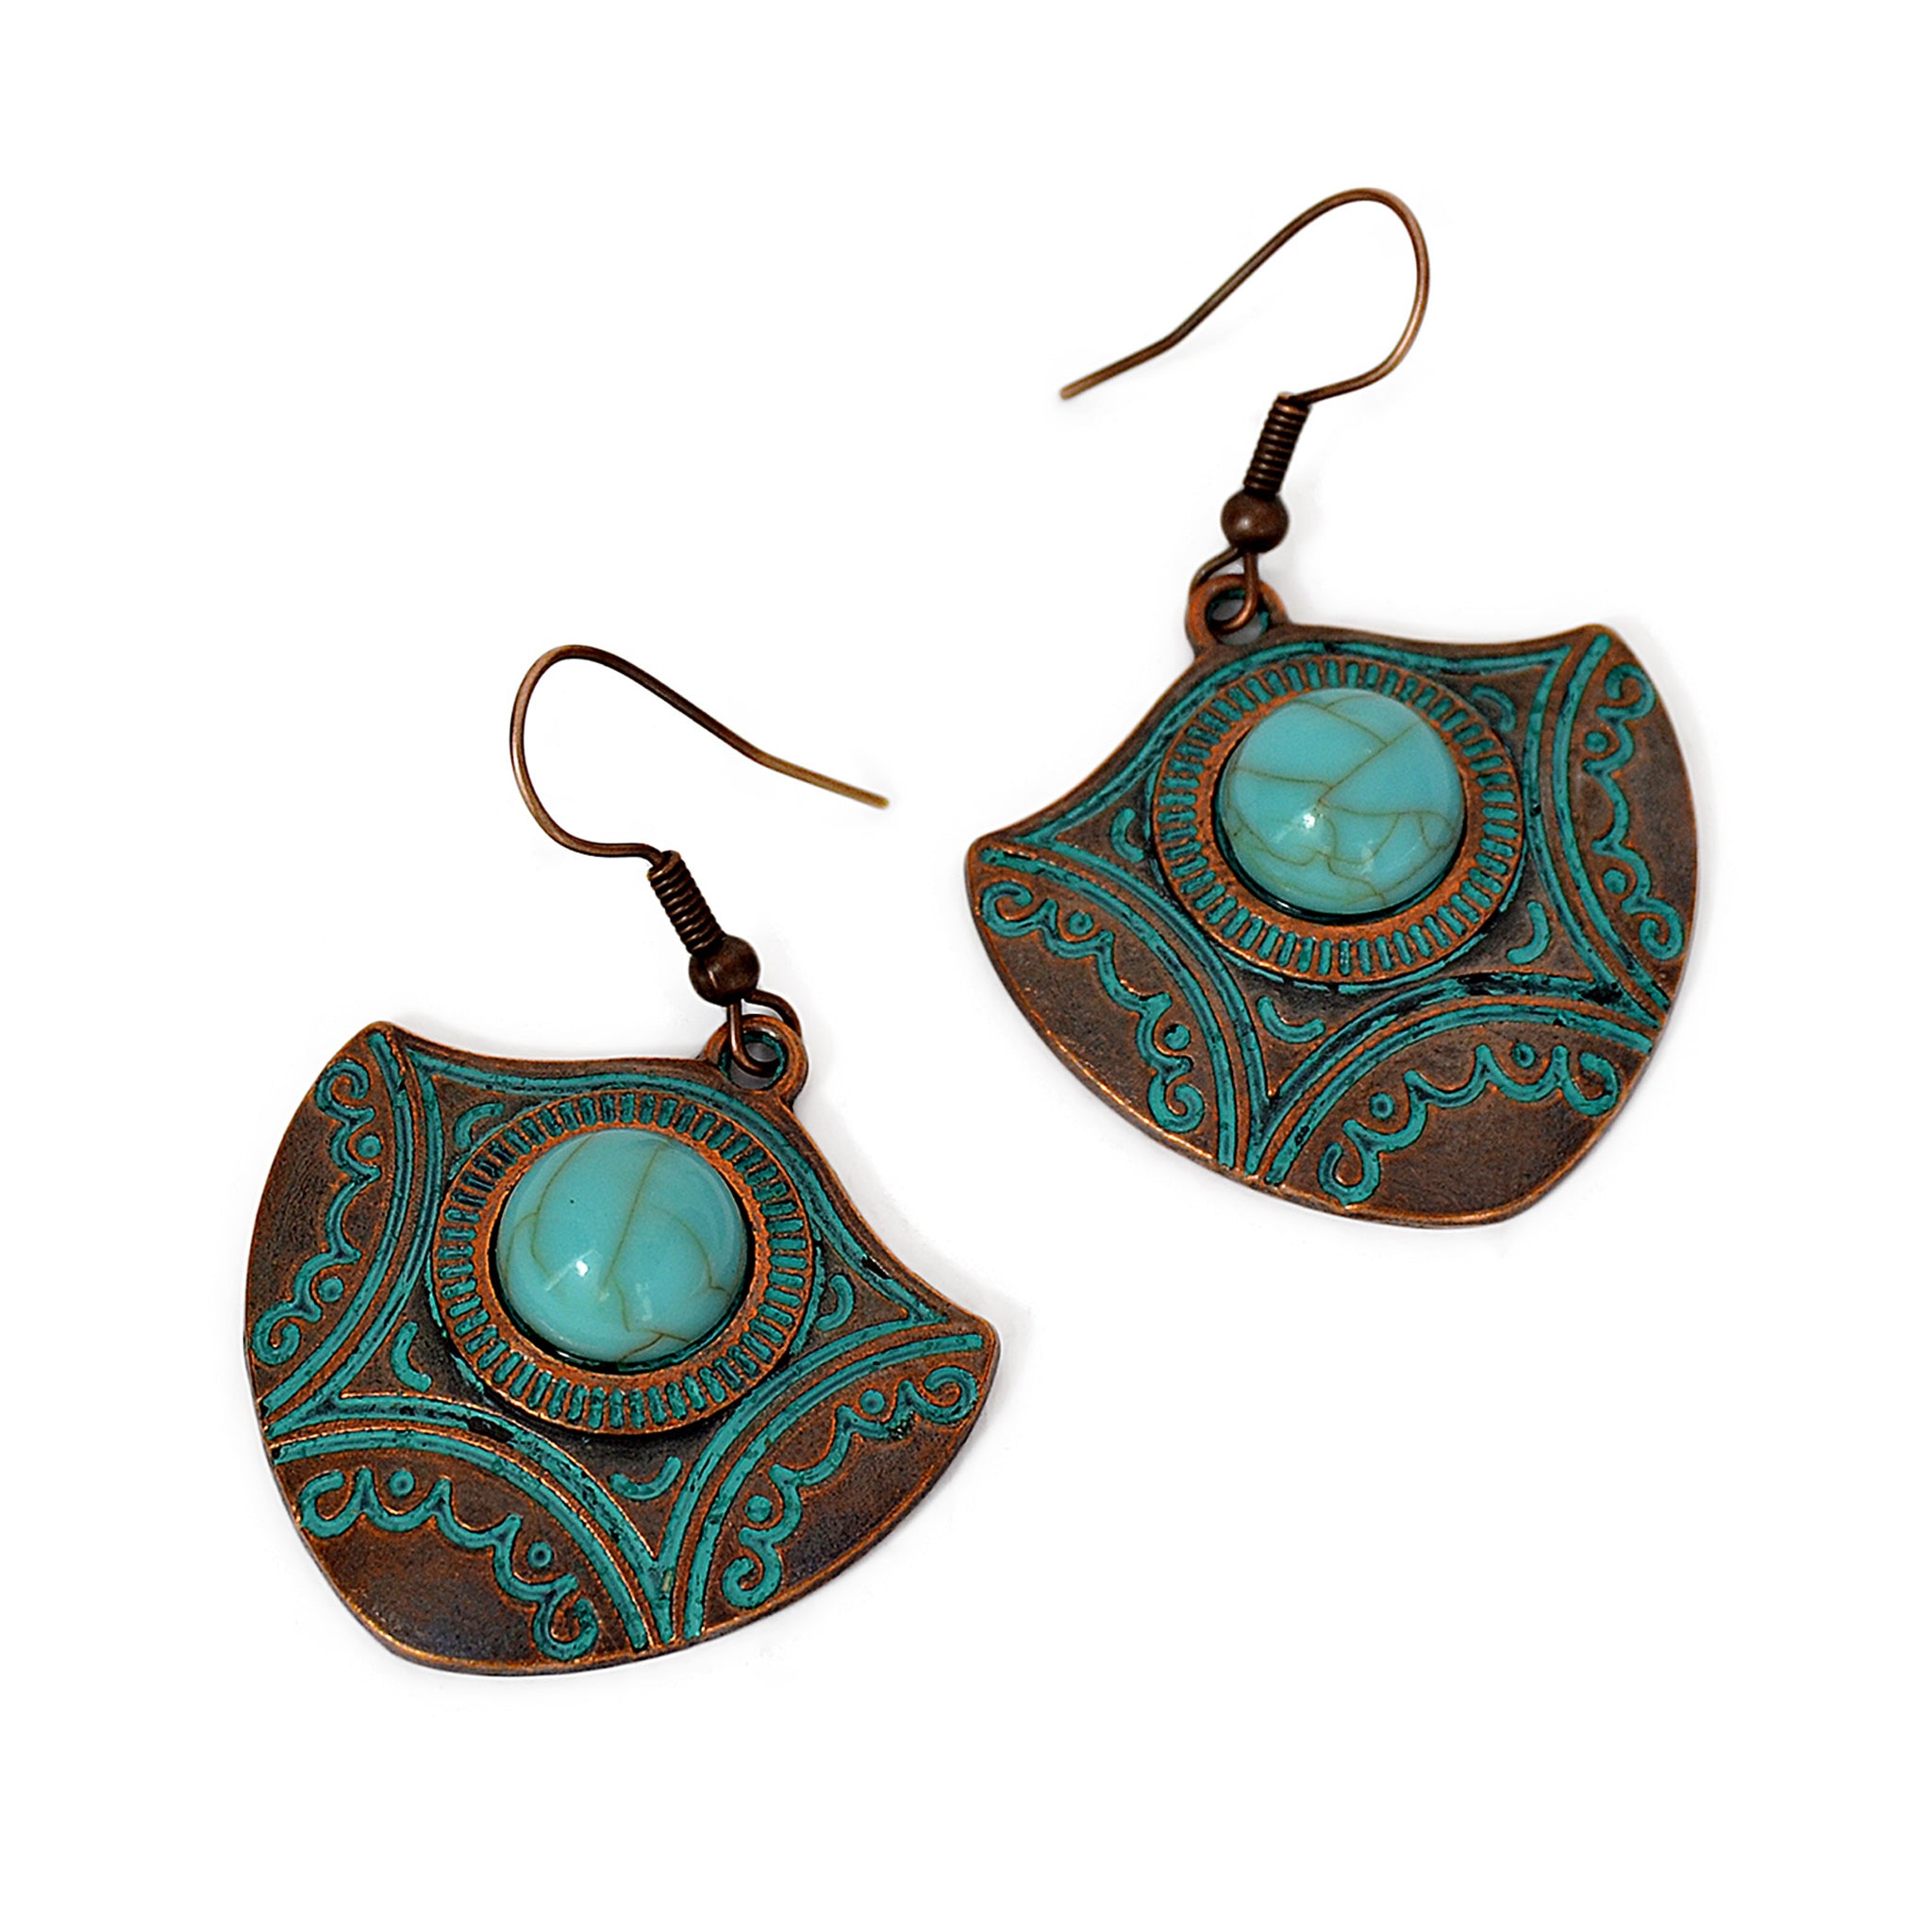 Dangle arrow earrings with turquoise bead and old blue patina on copper